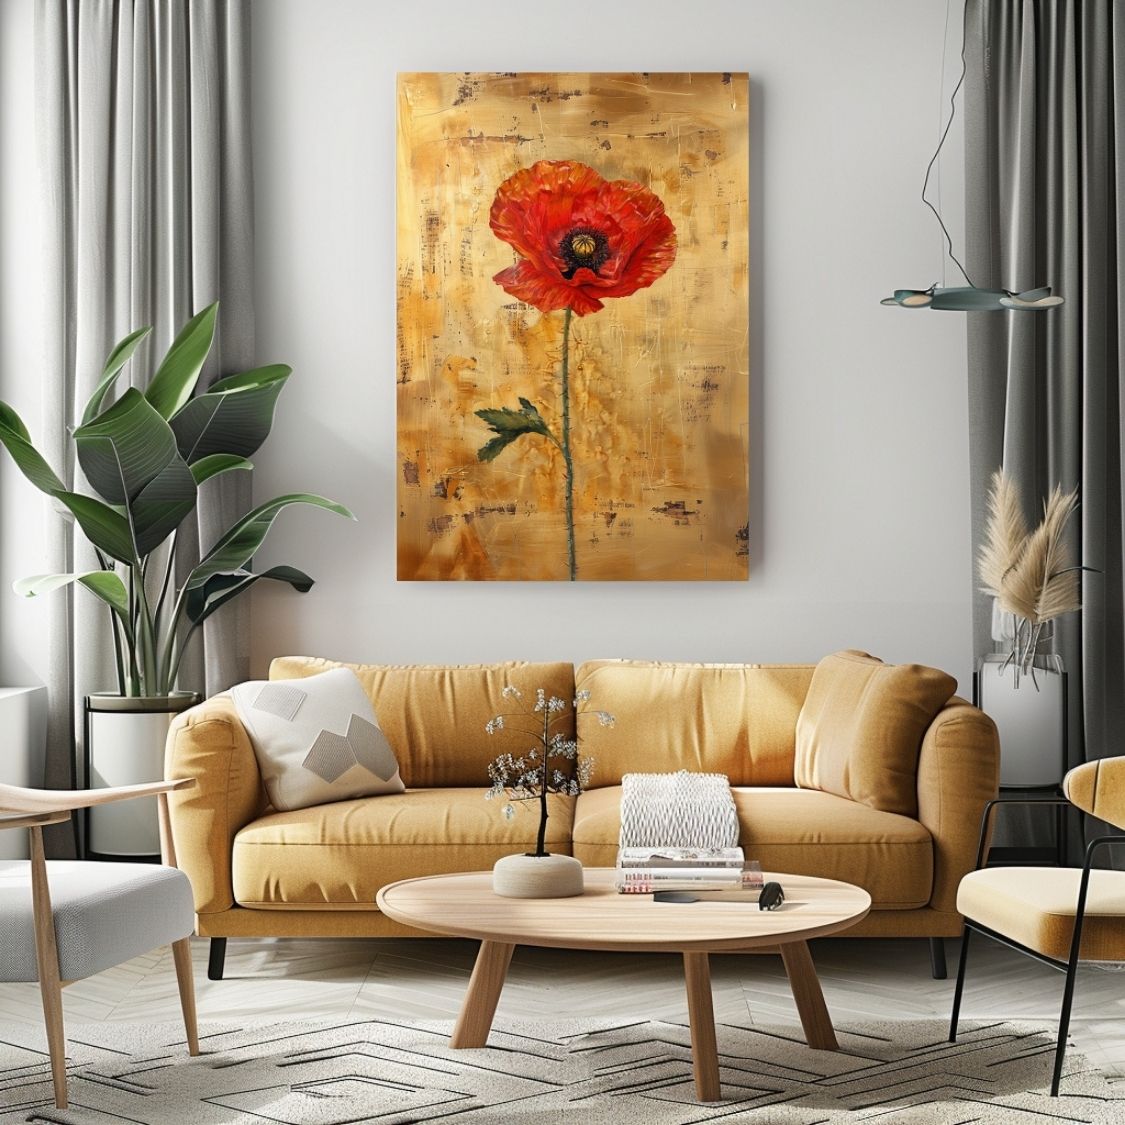 Canvas print wall art showing 'Poppy Poise - Elegance in Simplicity' in a living room